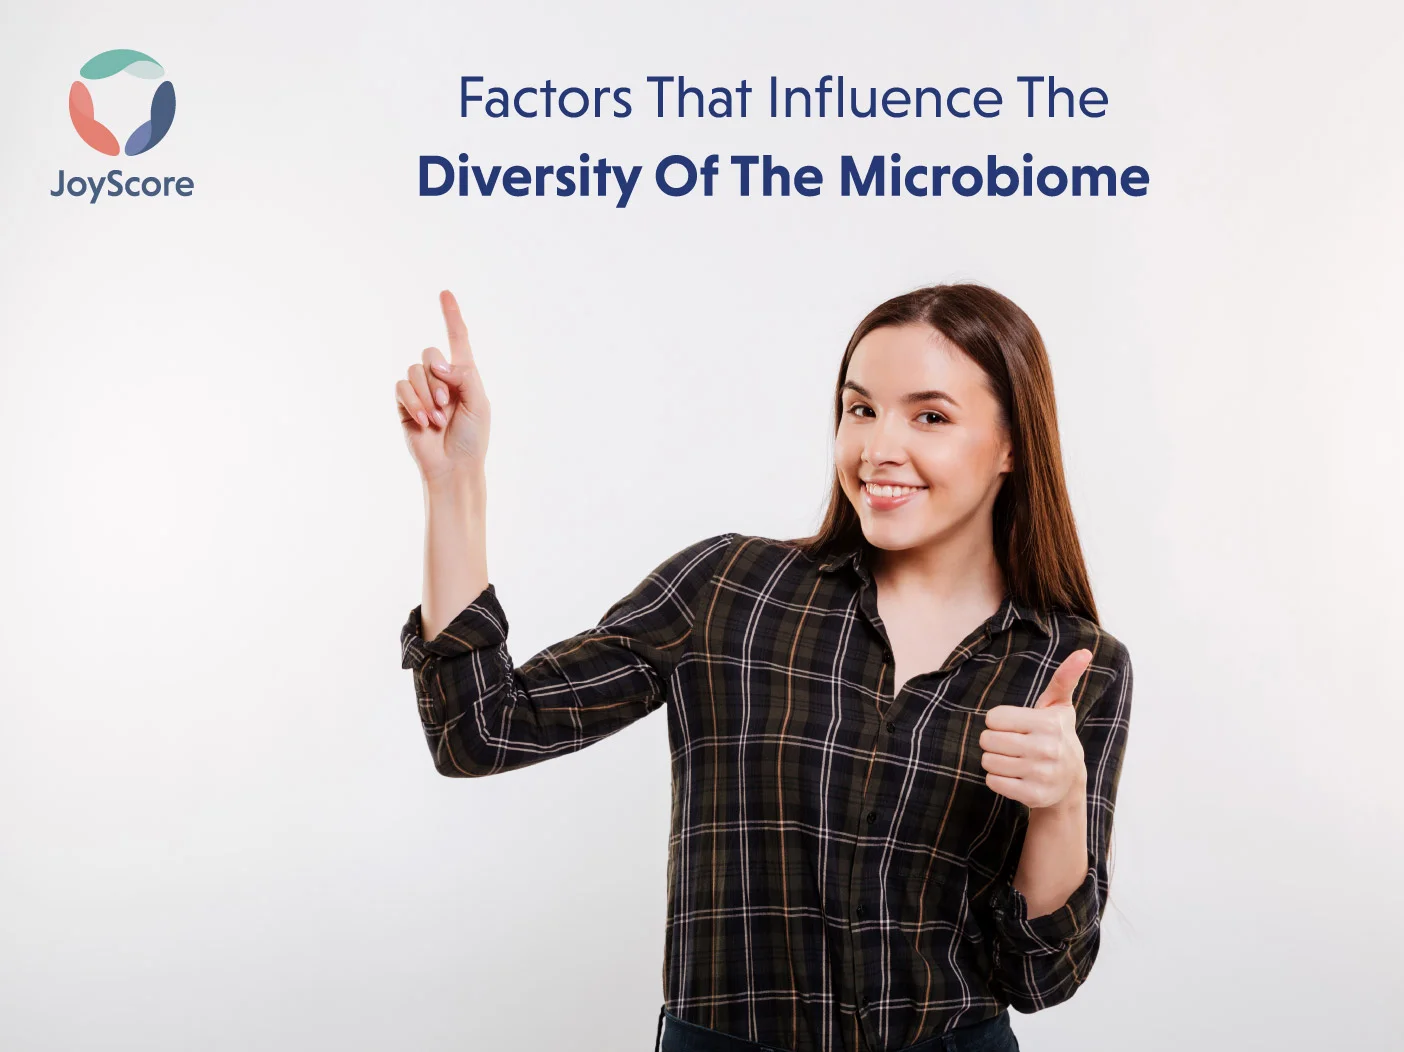 FACTORS THAT INFLUENCE THE DIVERSITY OF THE MICROBIOME